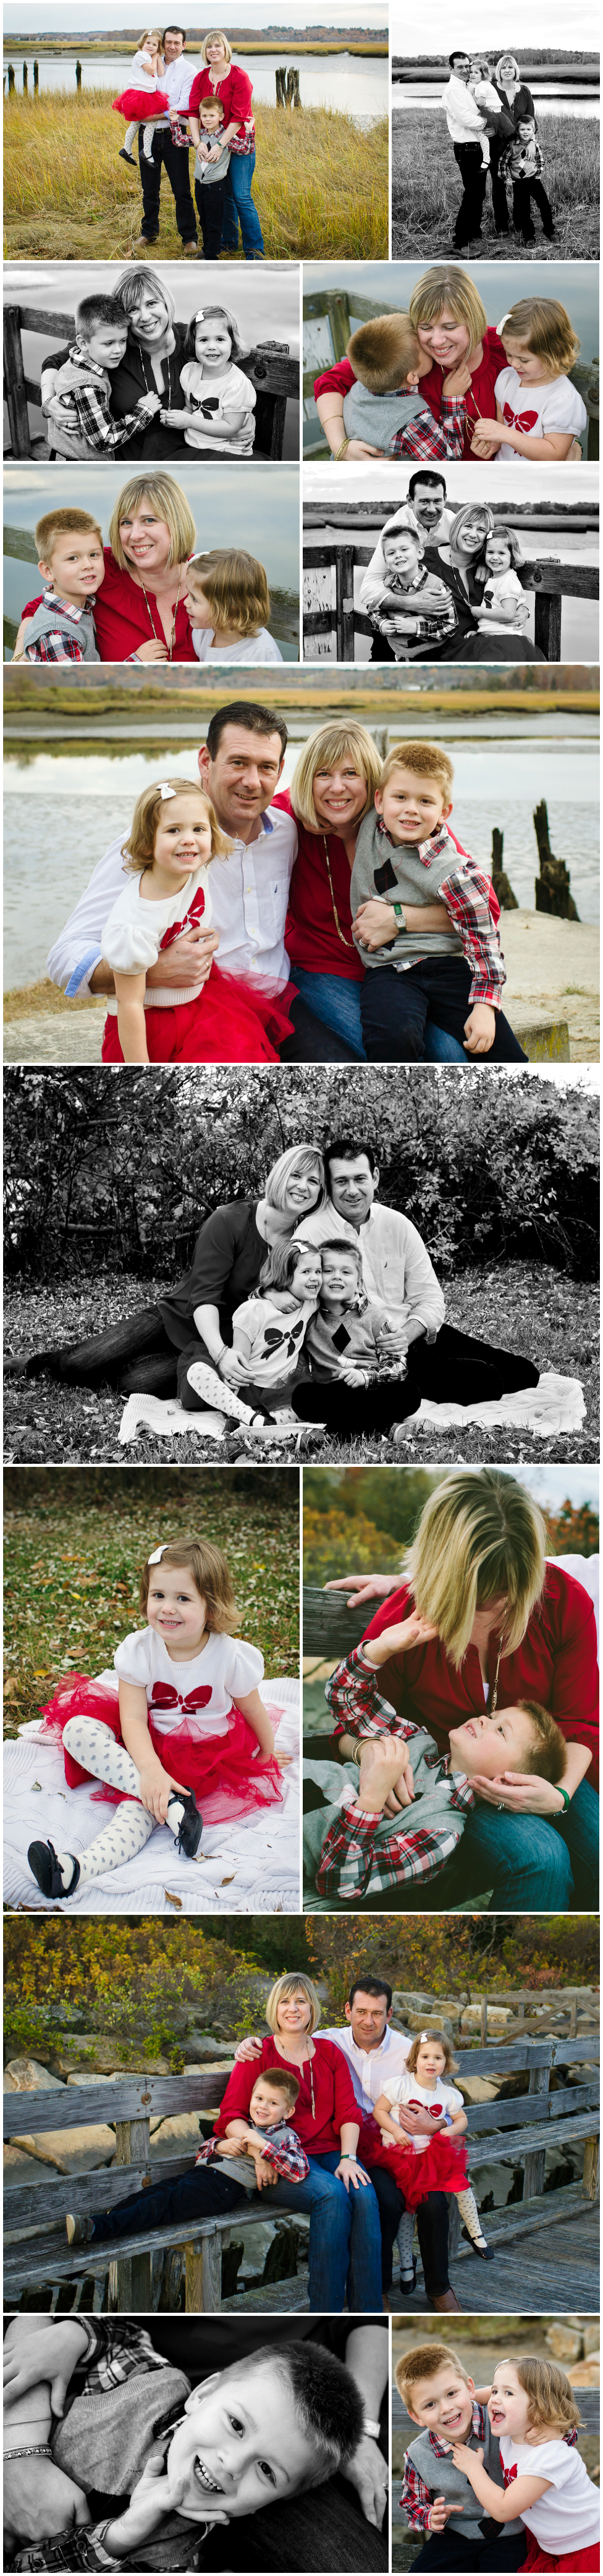 Cremins_Scituate_Family_Photographer